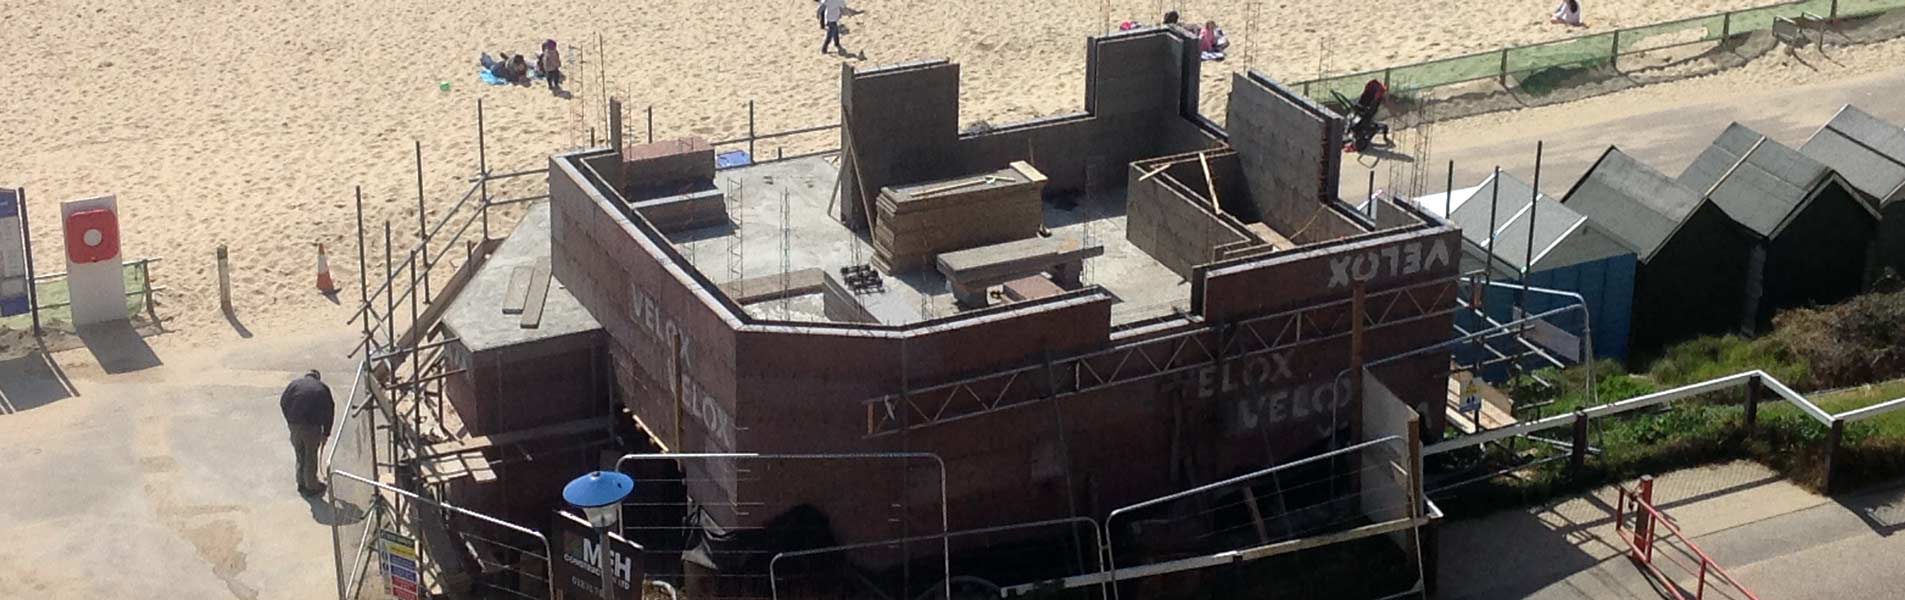 image of the Southbourne Surf Life Saving Club being built